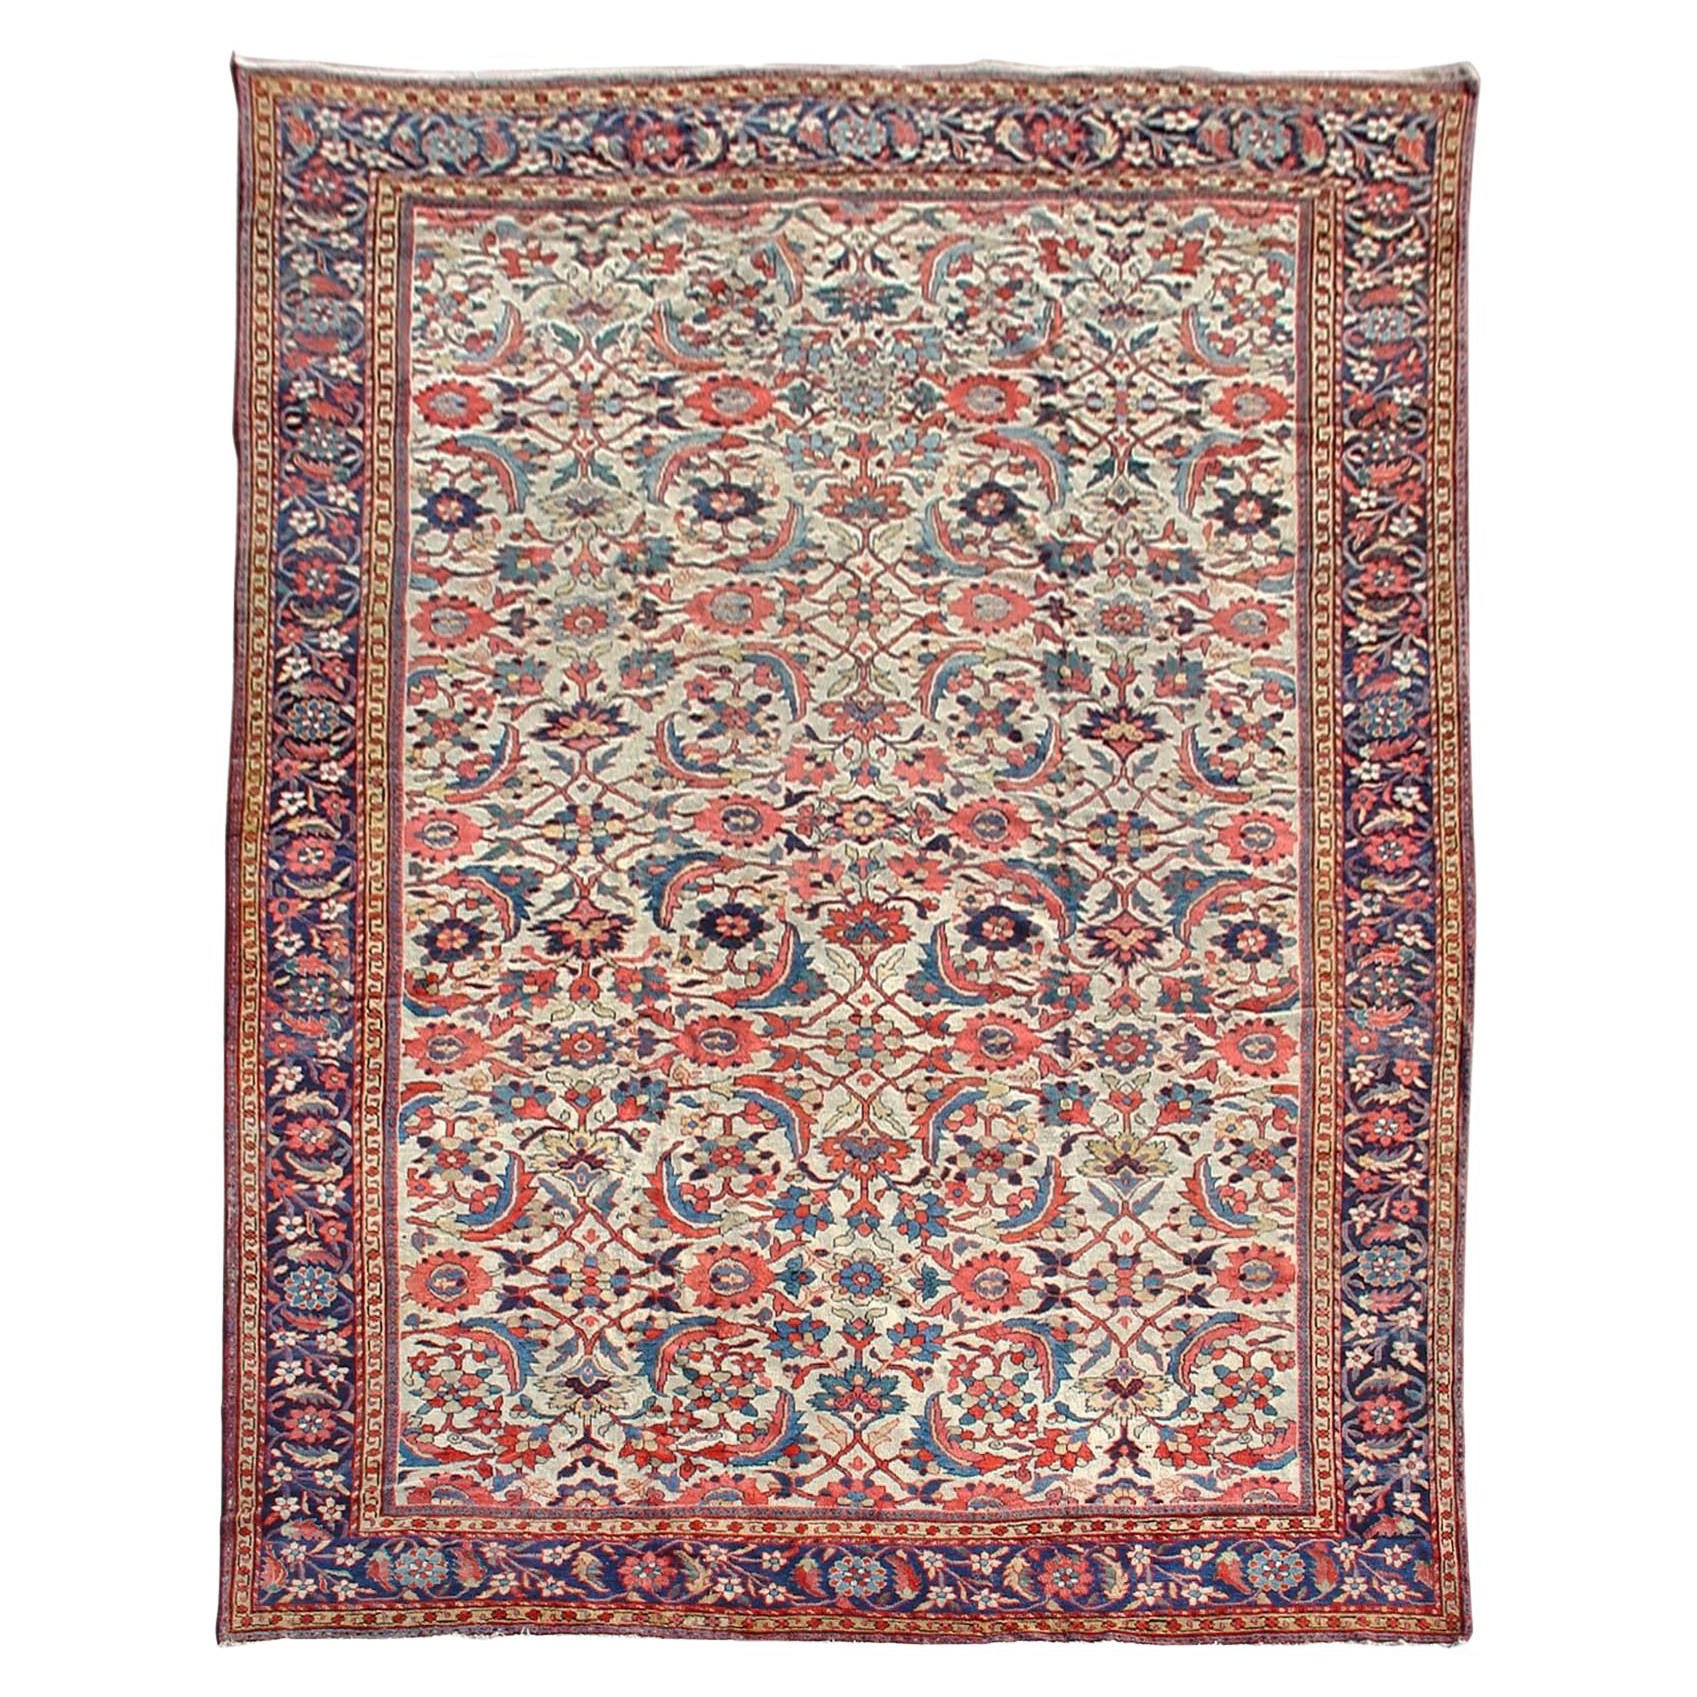 Large Antique Persian Fereghan Carpet, Late 19th Century For Sale